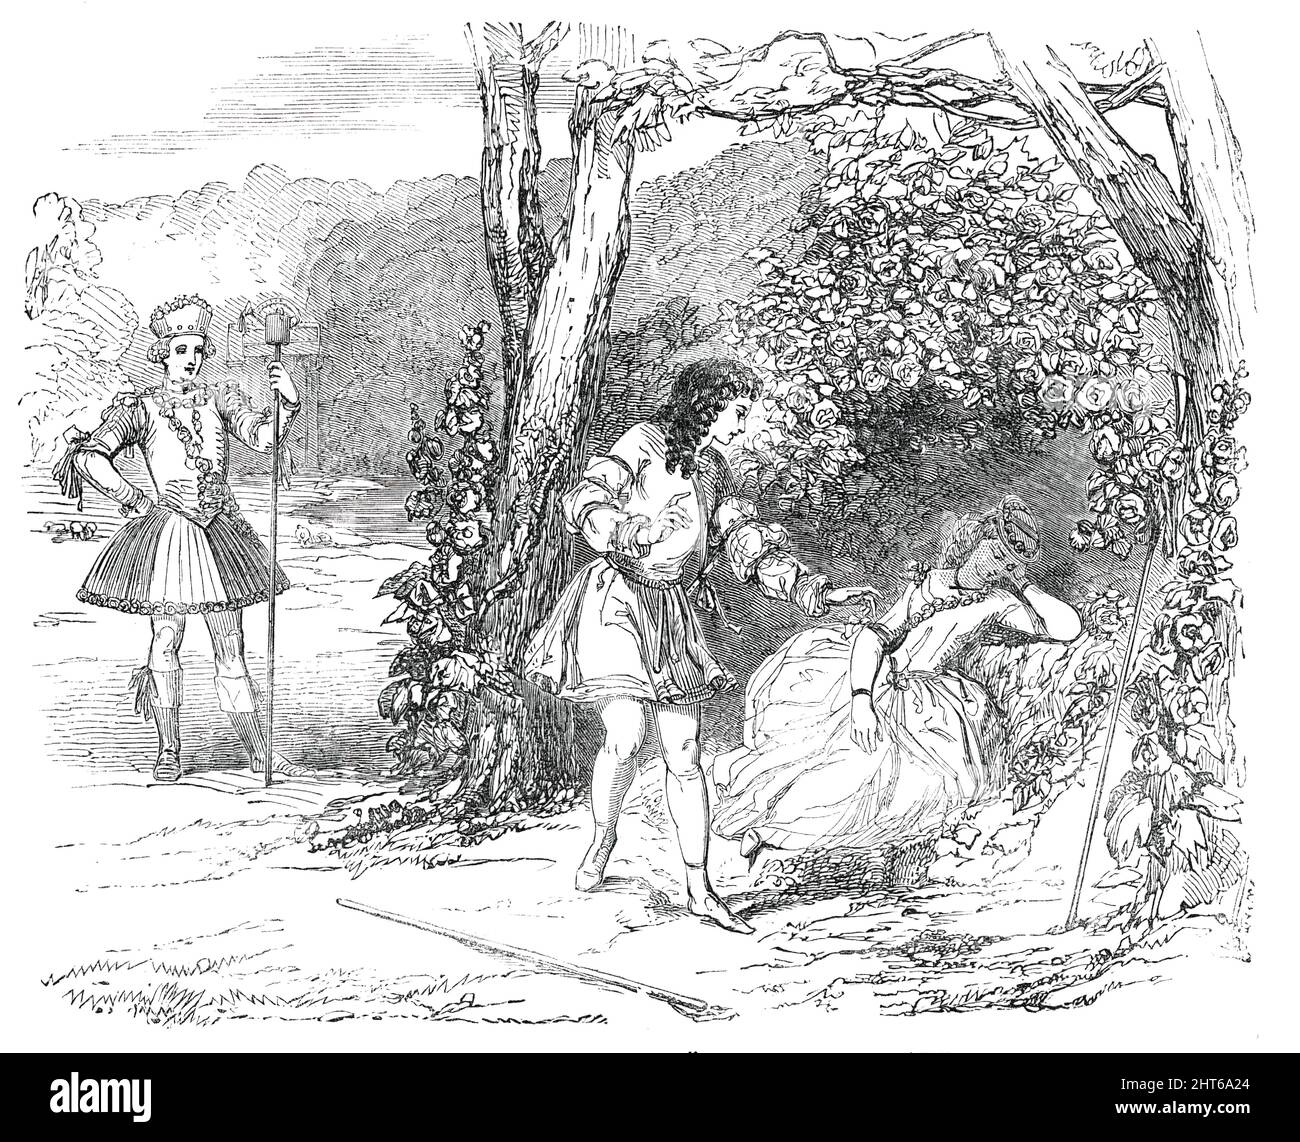 Scene from &quot;Cymon and Iphigenia&quot;, at the Lyceum Theatre, [London], 1850. '...the scene in which Iphigenia is discovered in a bower asleep by Cymon, who falls in love with her, April standing by, and watching the youthful pair...Iphigenia, or Sylvia, was represented by a debutante, Miss Manners, whose appearance is suggestive of promise which we hope to see fulfilled. Mr. Frank Matthews, as her old guardian, Dorcas, was full of his usual drollery, and illustrated deafness to admiration. The scenery and all the appointments of the stage were exquisitely elegant and effective. The dialo Stock Photo